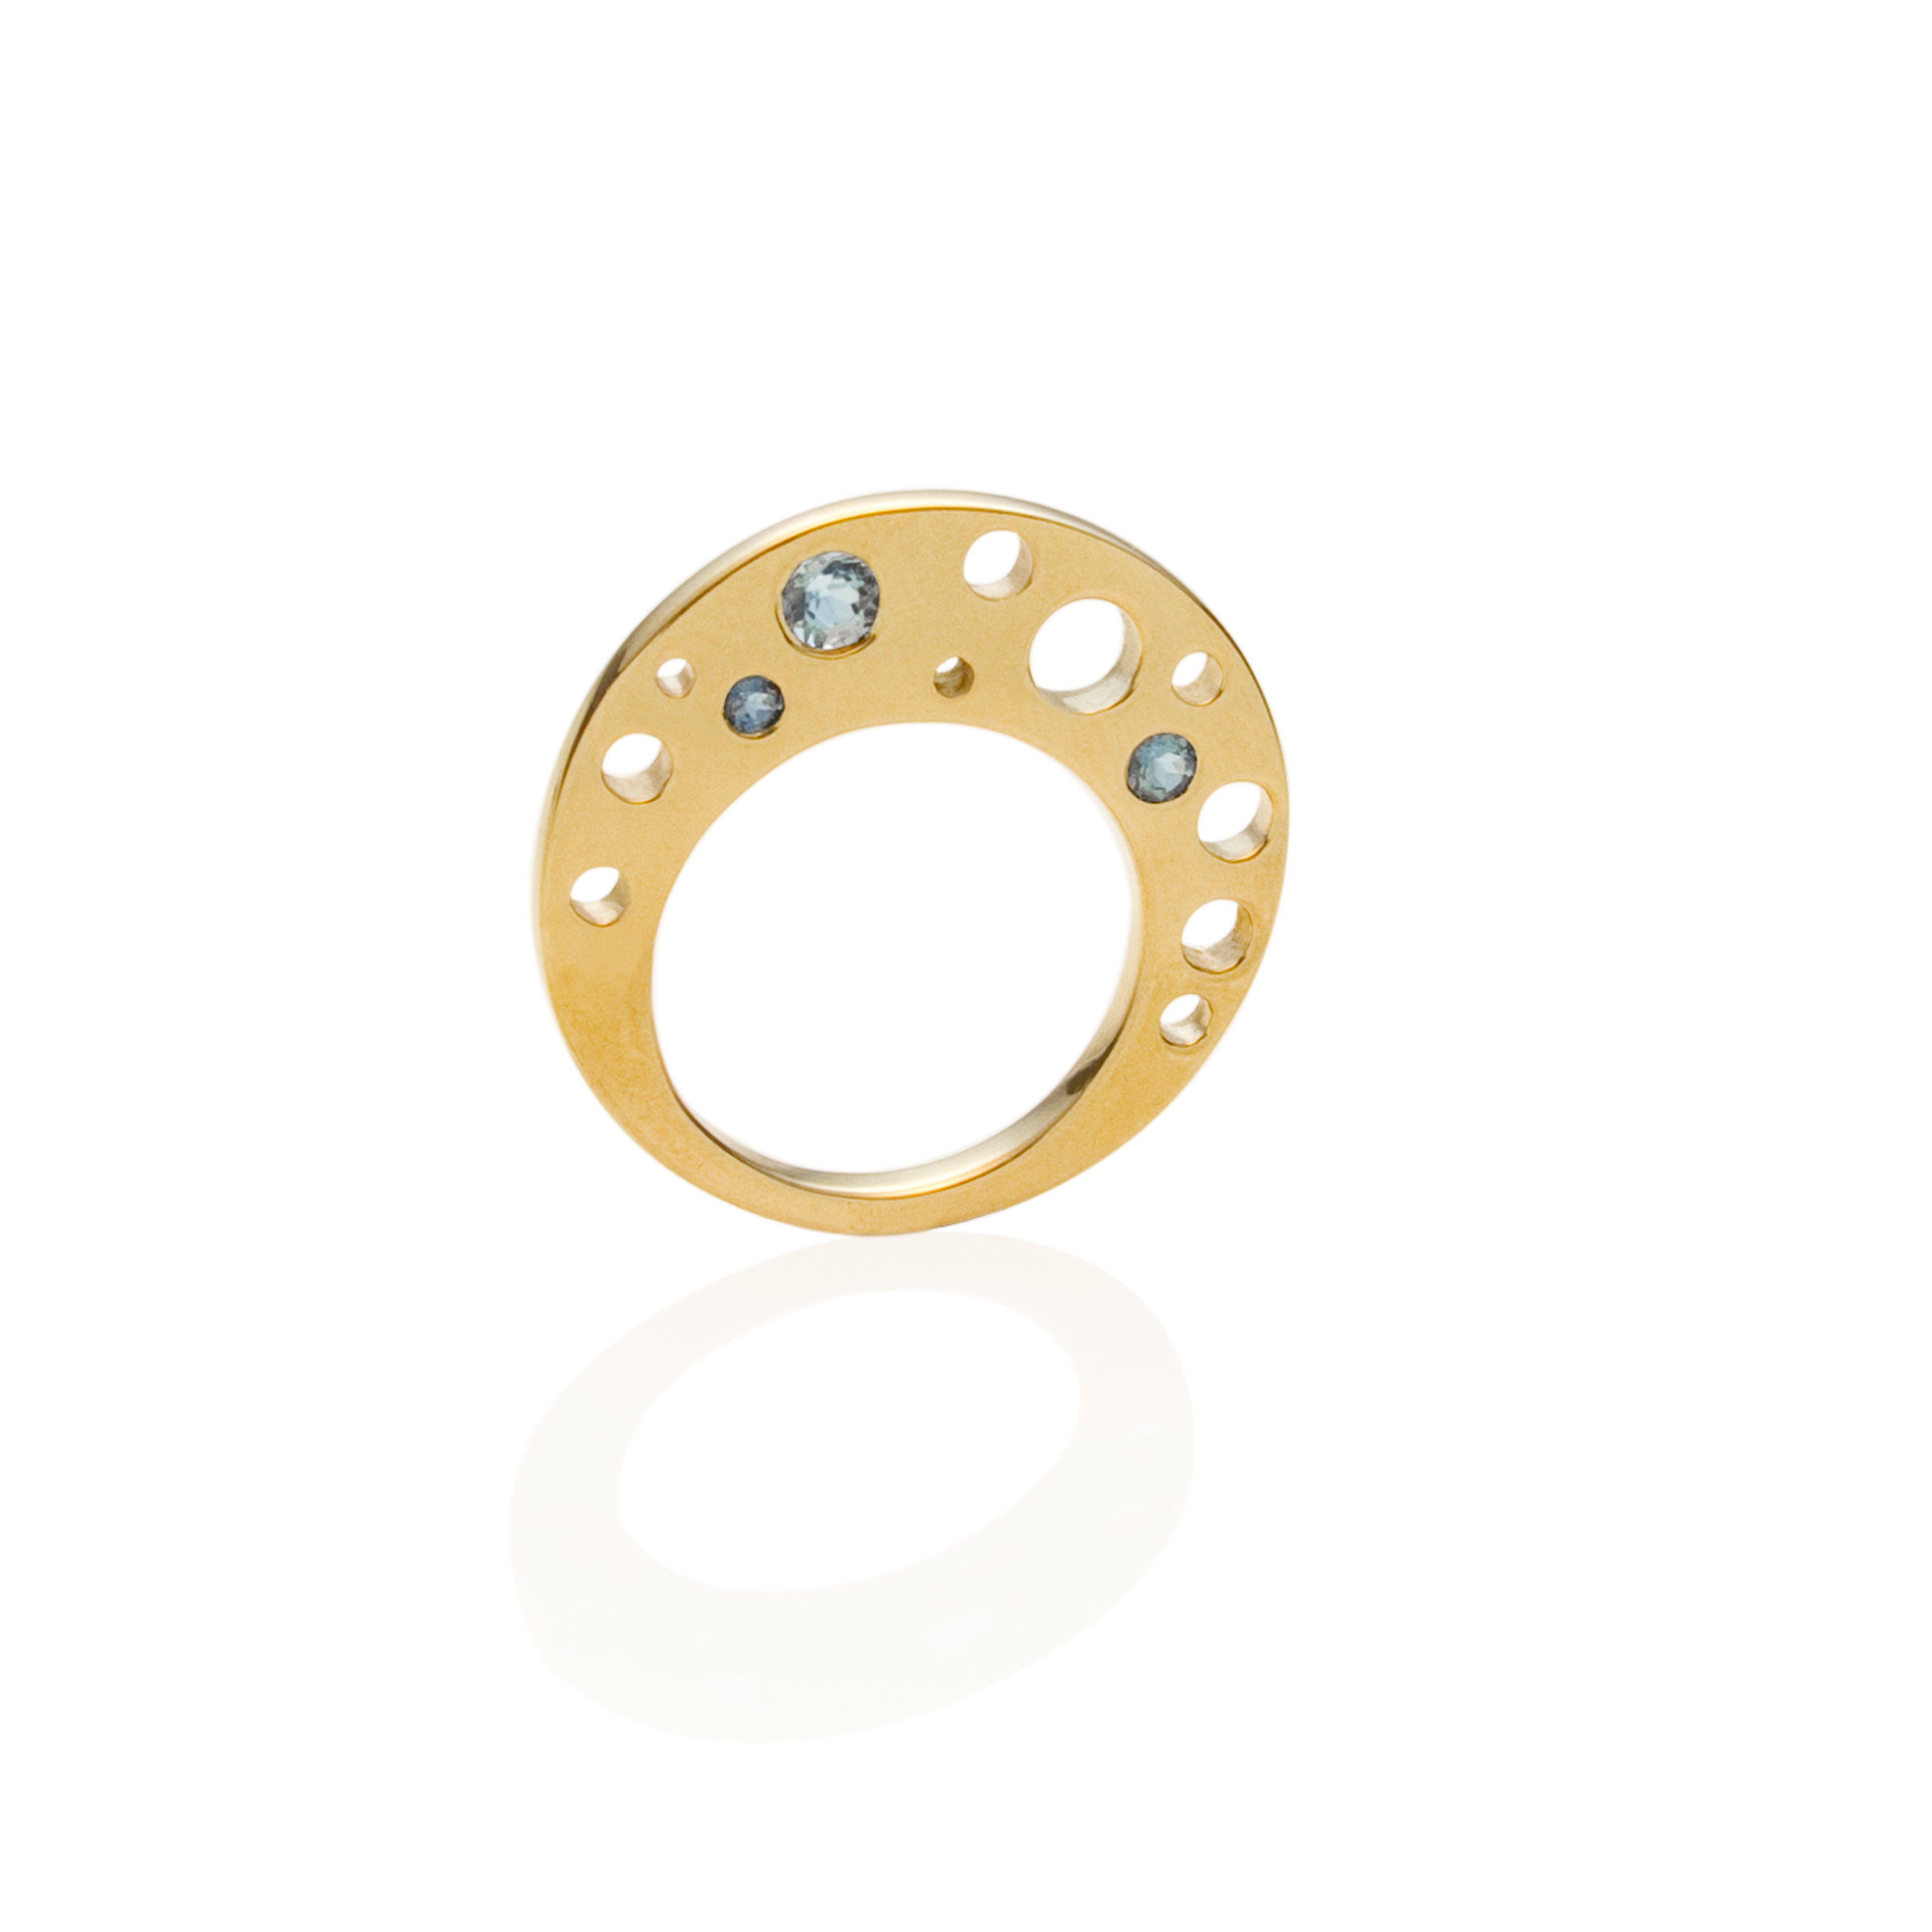 Hello Circle Flat Ring – you were designed to be different - and to help us appreciate what is important in life, simplicity and the beauty of life itself.    

Based on our unadulterated love for design, minimalism and luxury. Plus, the Circle Ring